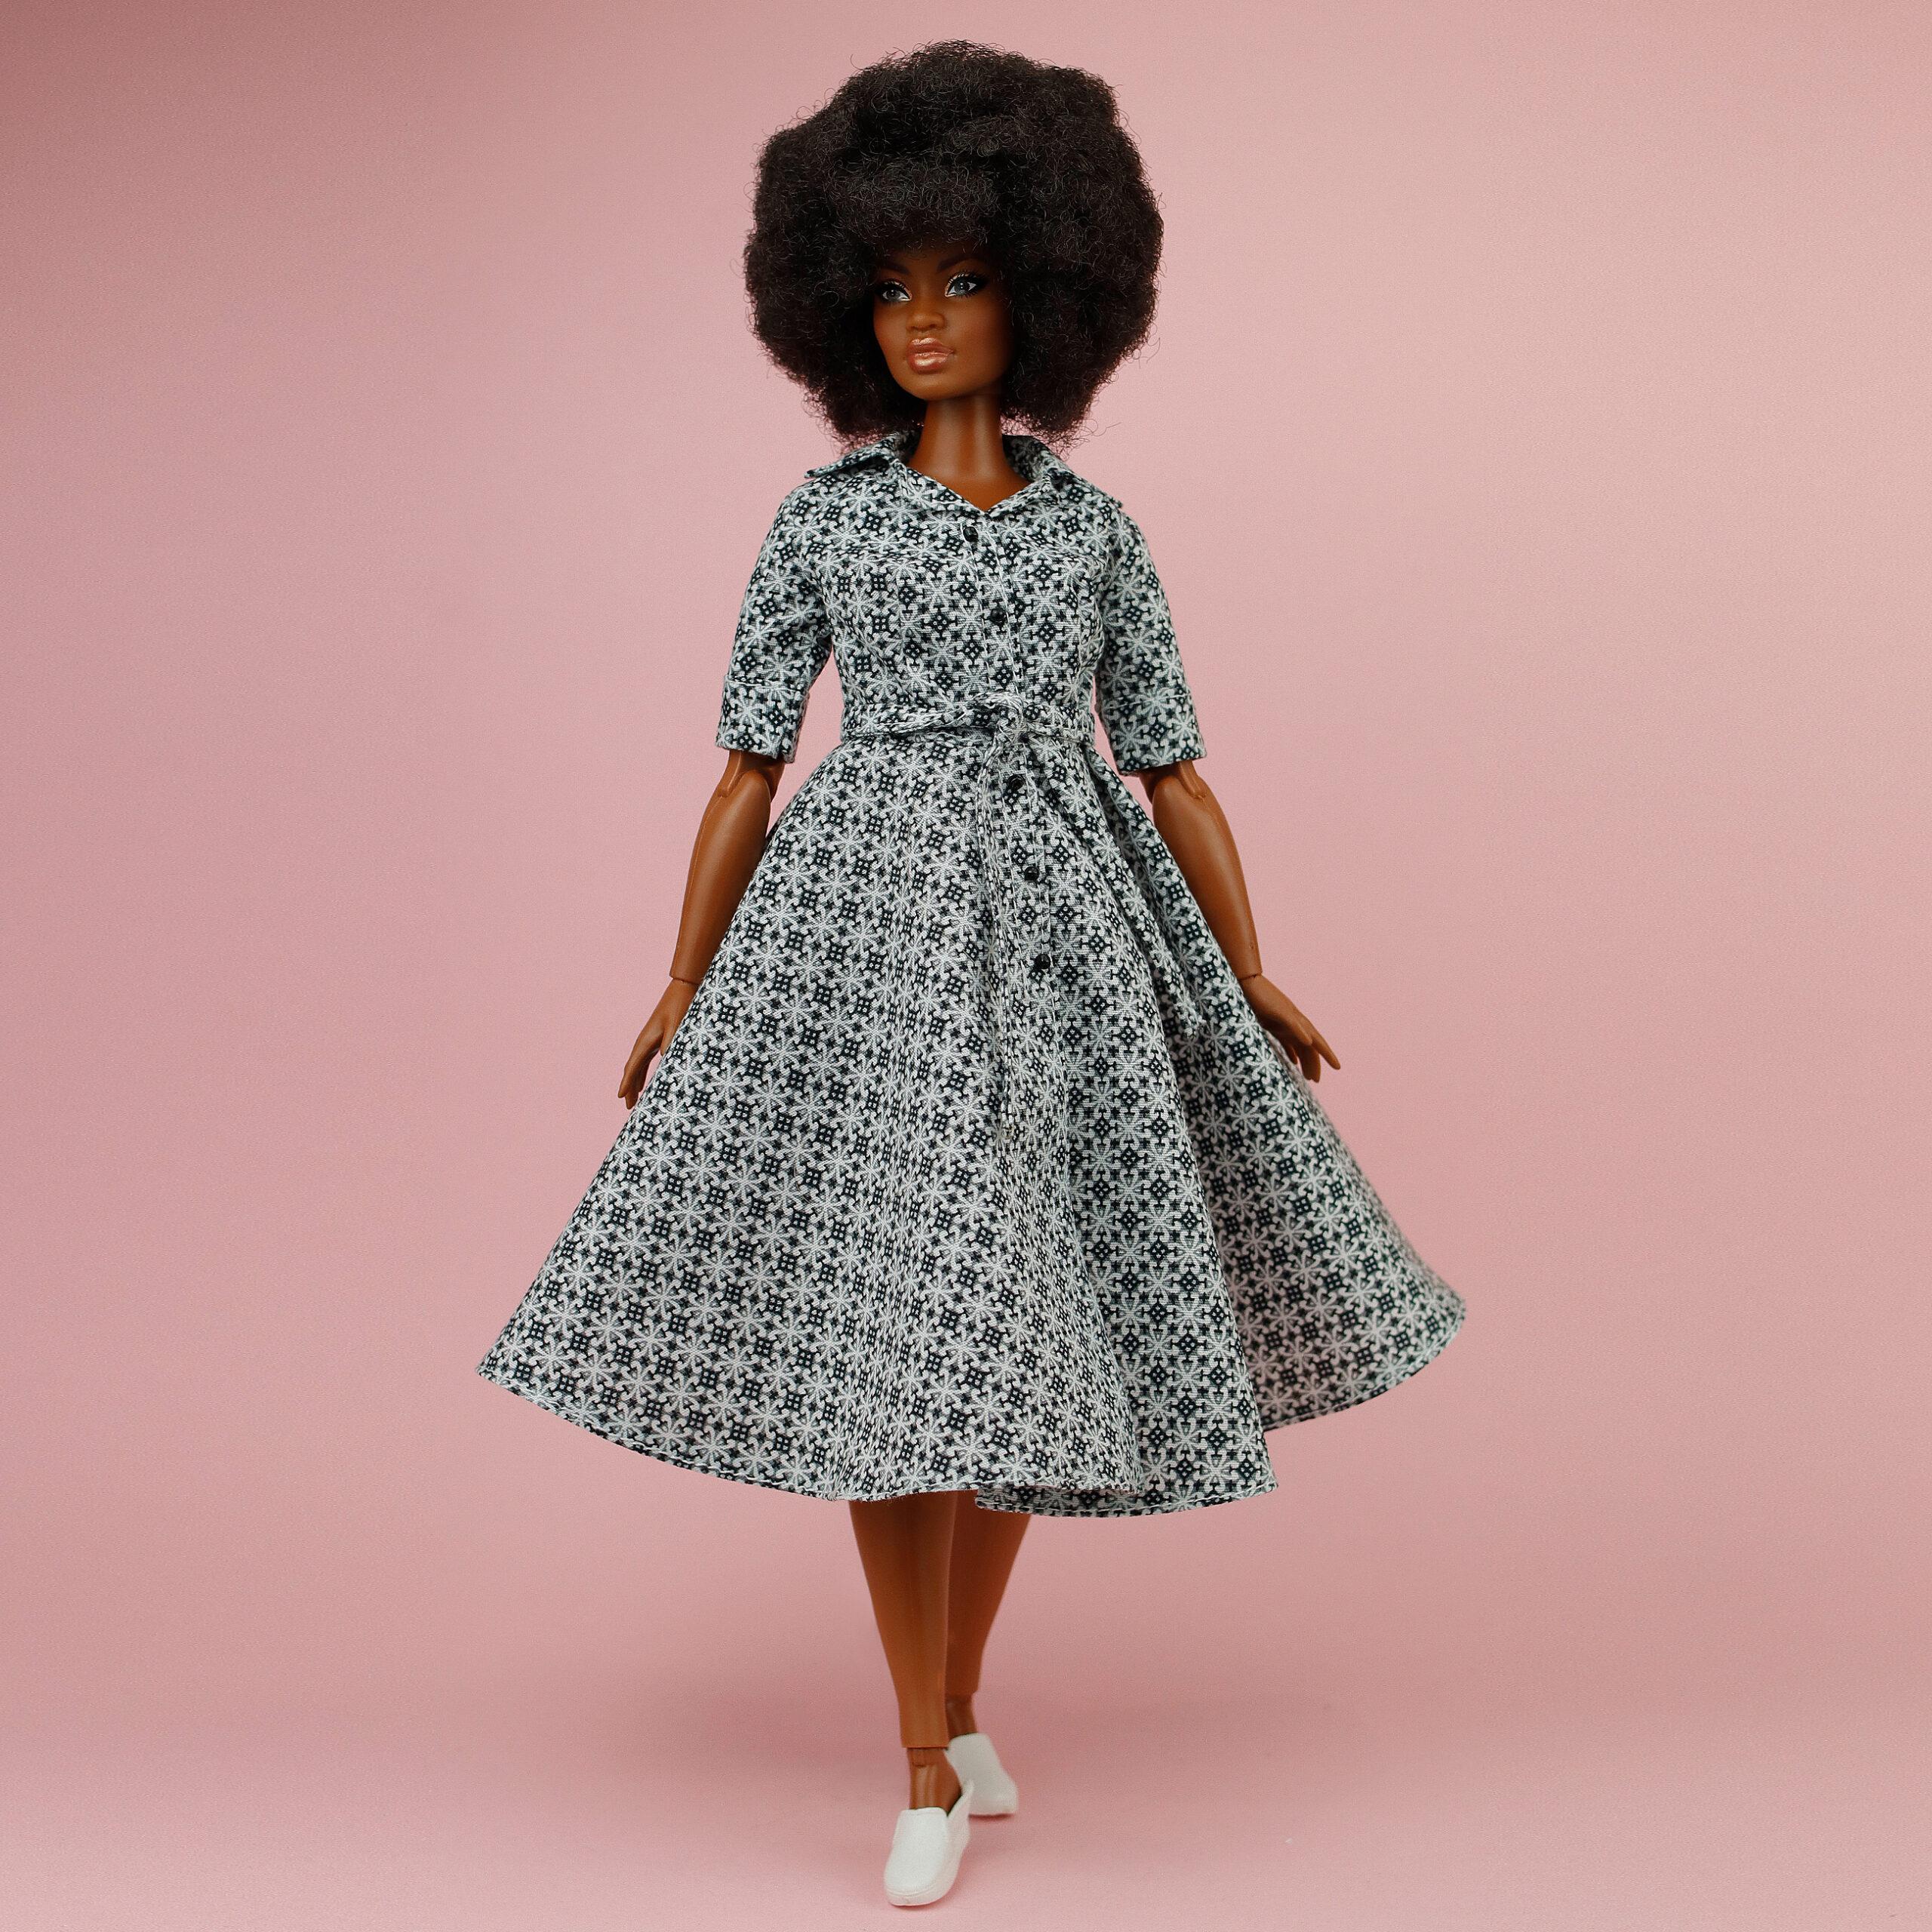 FA-008 Gray tiny pattern dress shirt outfit for 11 1/2 Prime; Brb Pivotal  Made-to-Move Yoga dolls Poppy Parker doll and similar dolls